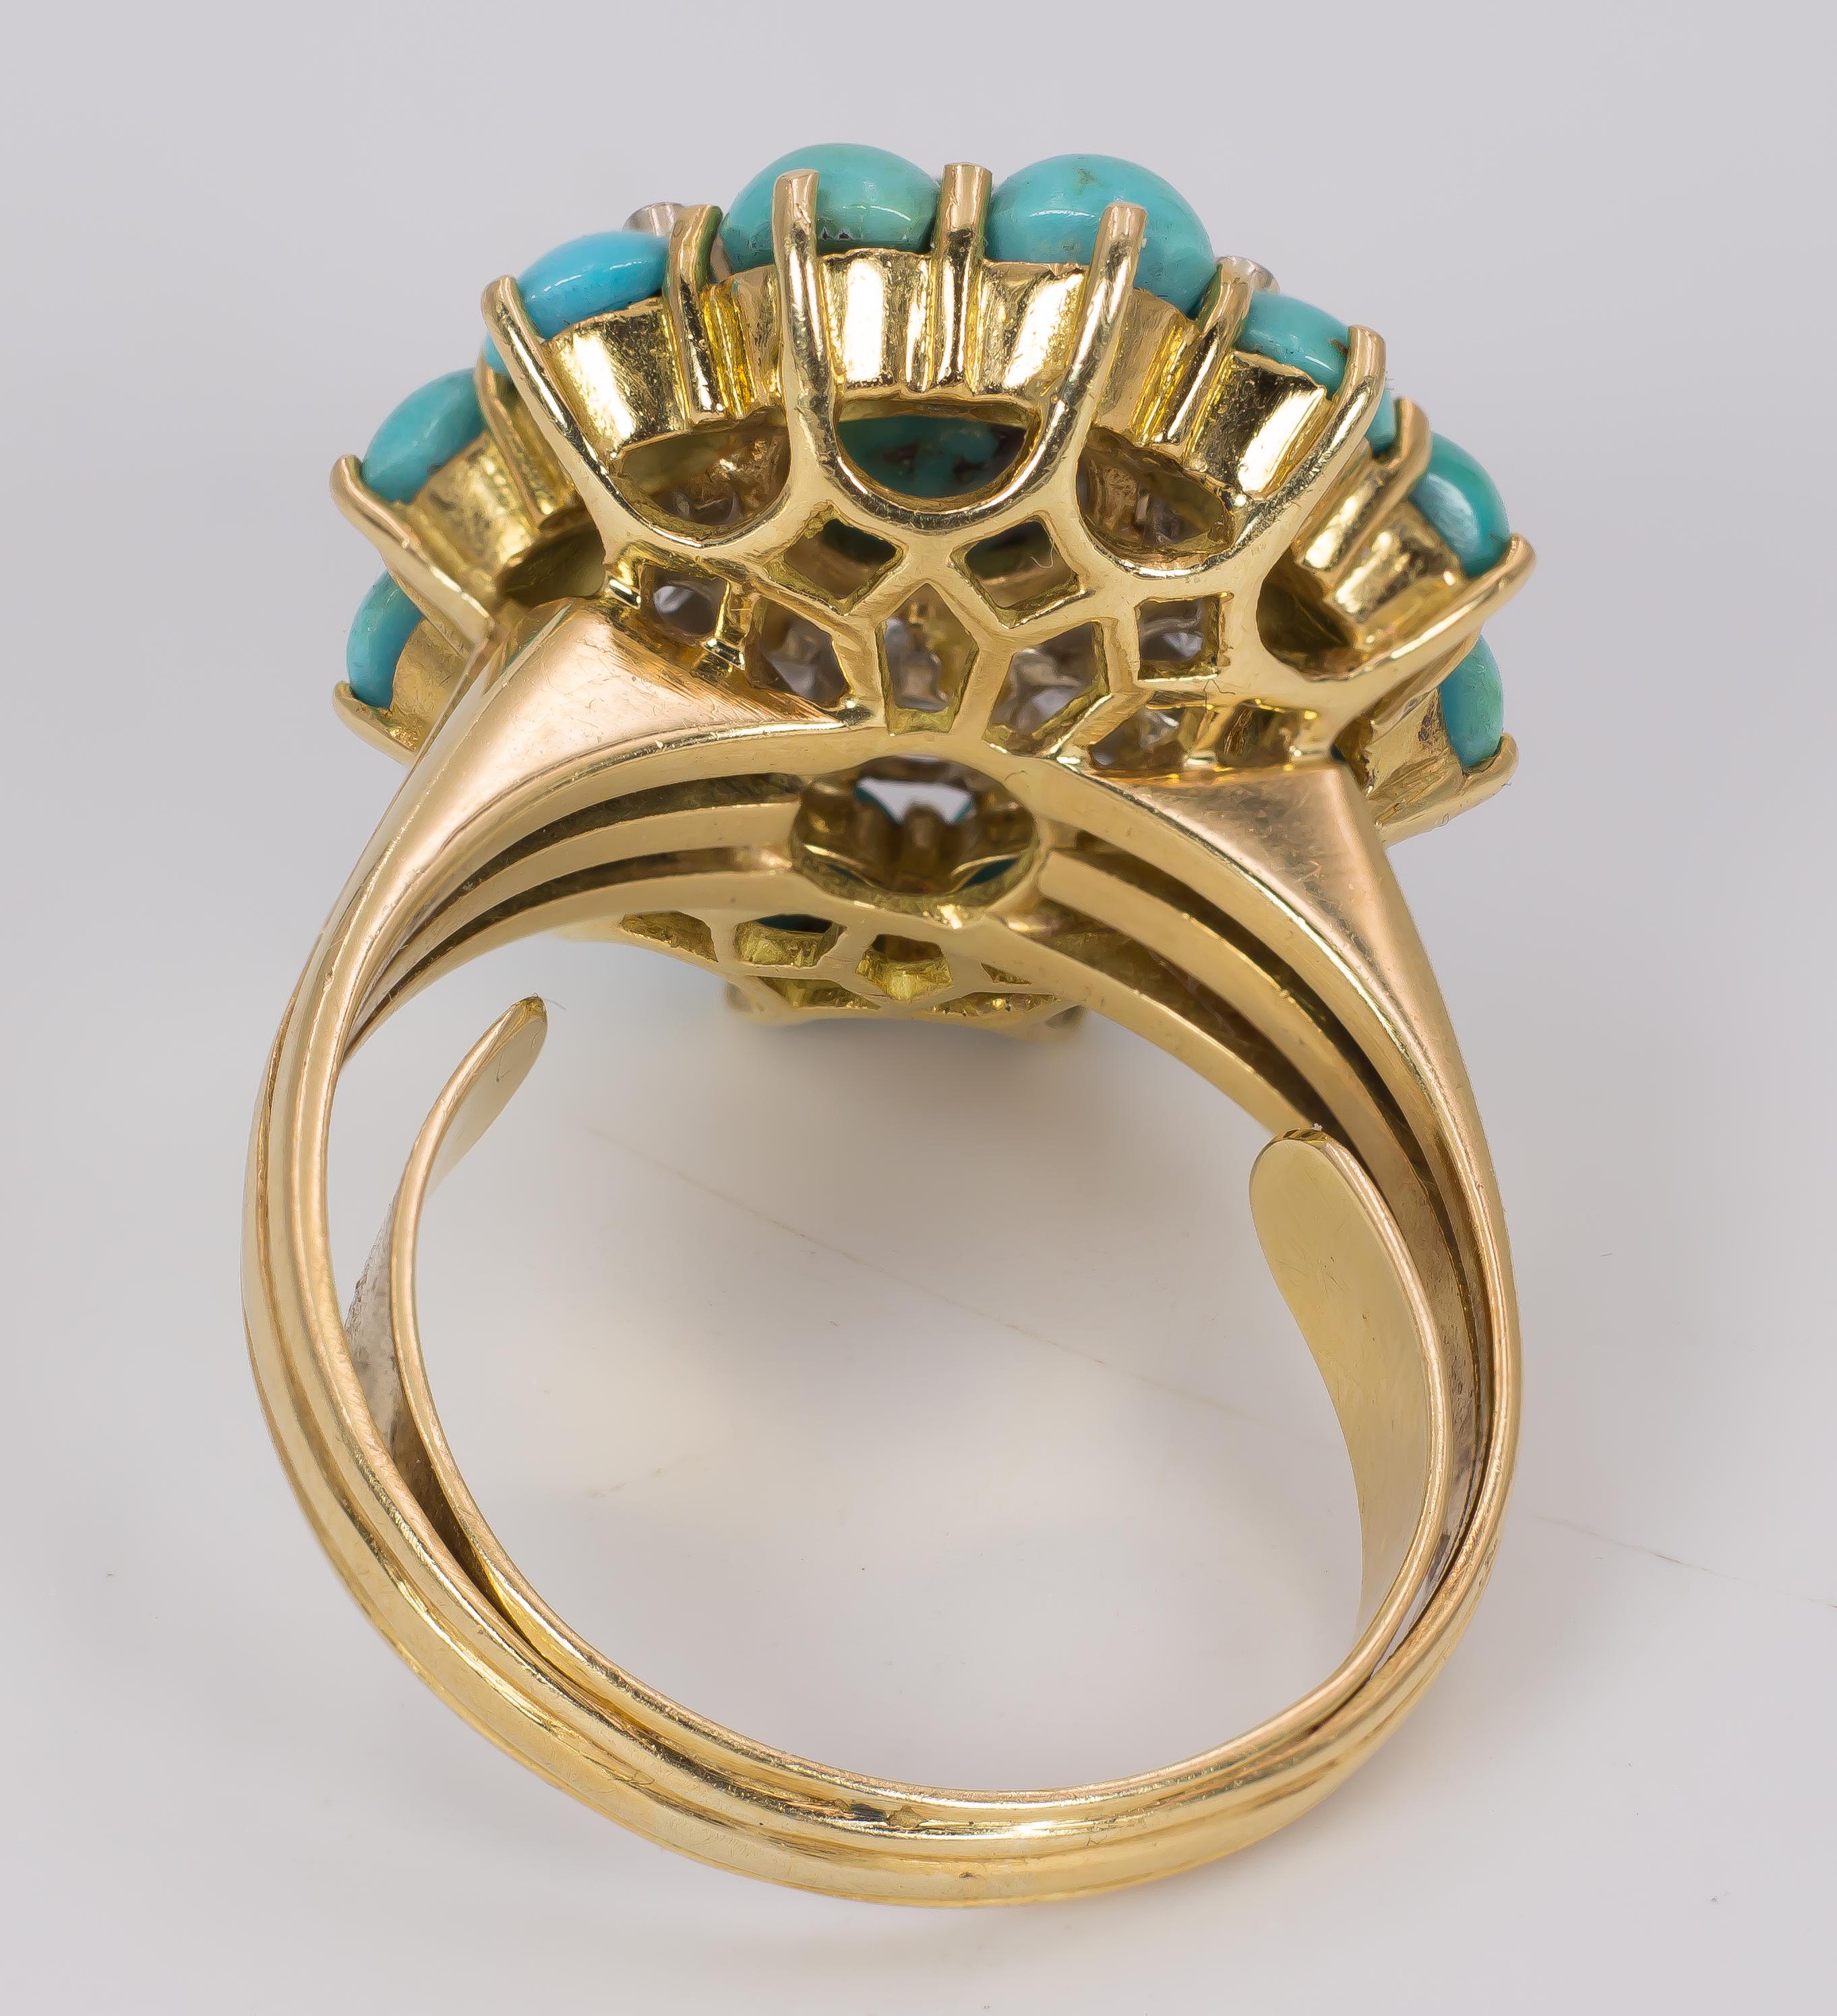 Vintage 18 Karat Gold, 1.2 Carat Diamond and Turquoise Ring, 1960s In Good Condition For Sale In Bologna, IT